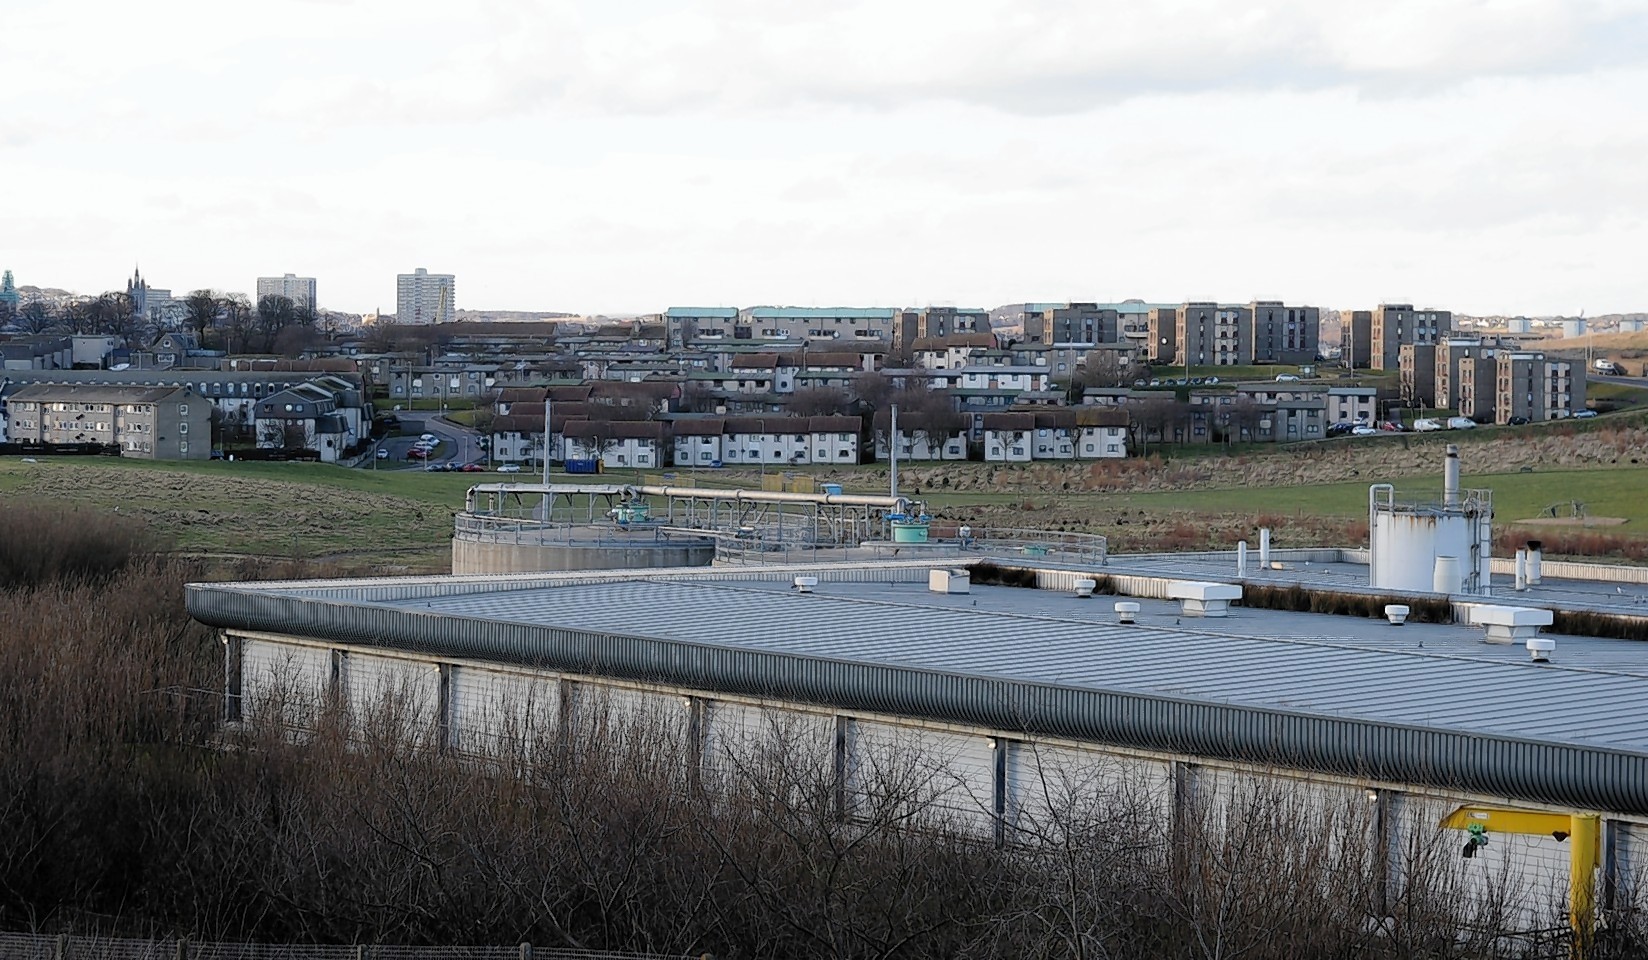 Nigg Waste Water Treatment Plant, Coast Rd, Aberdeen, with Torry in the background